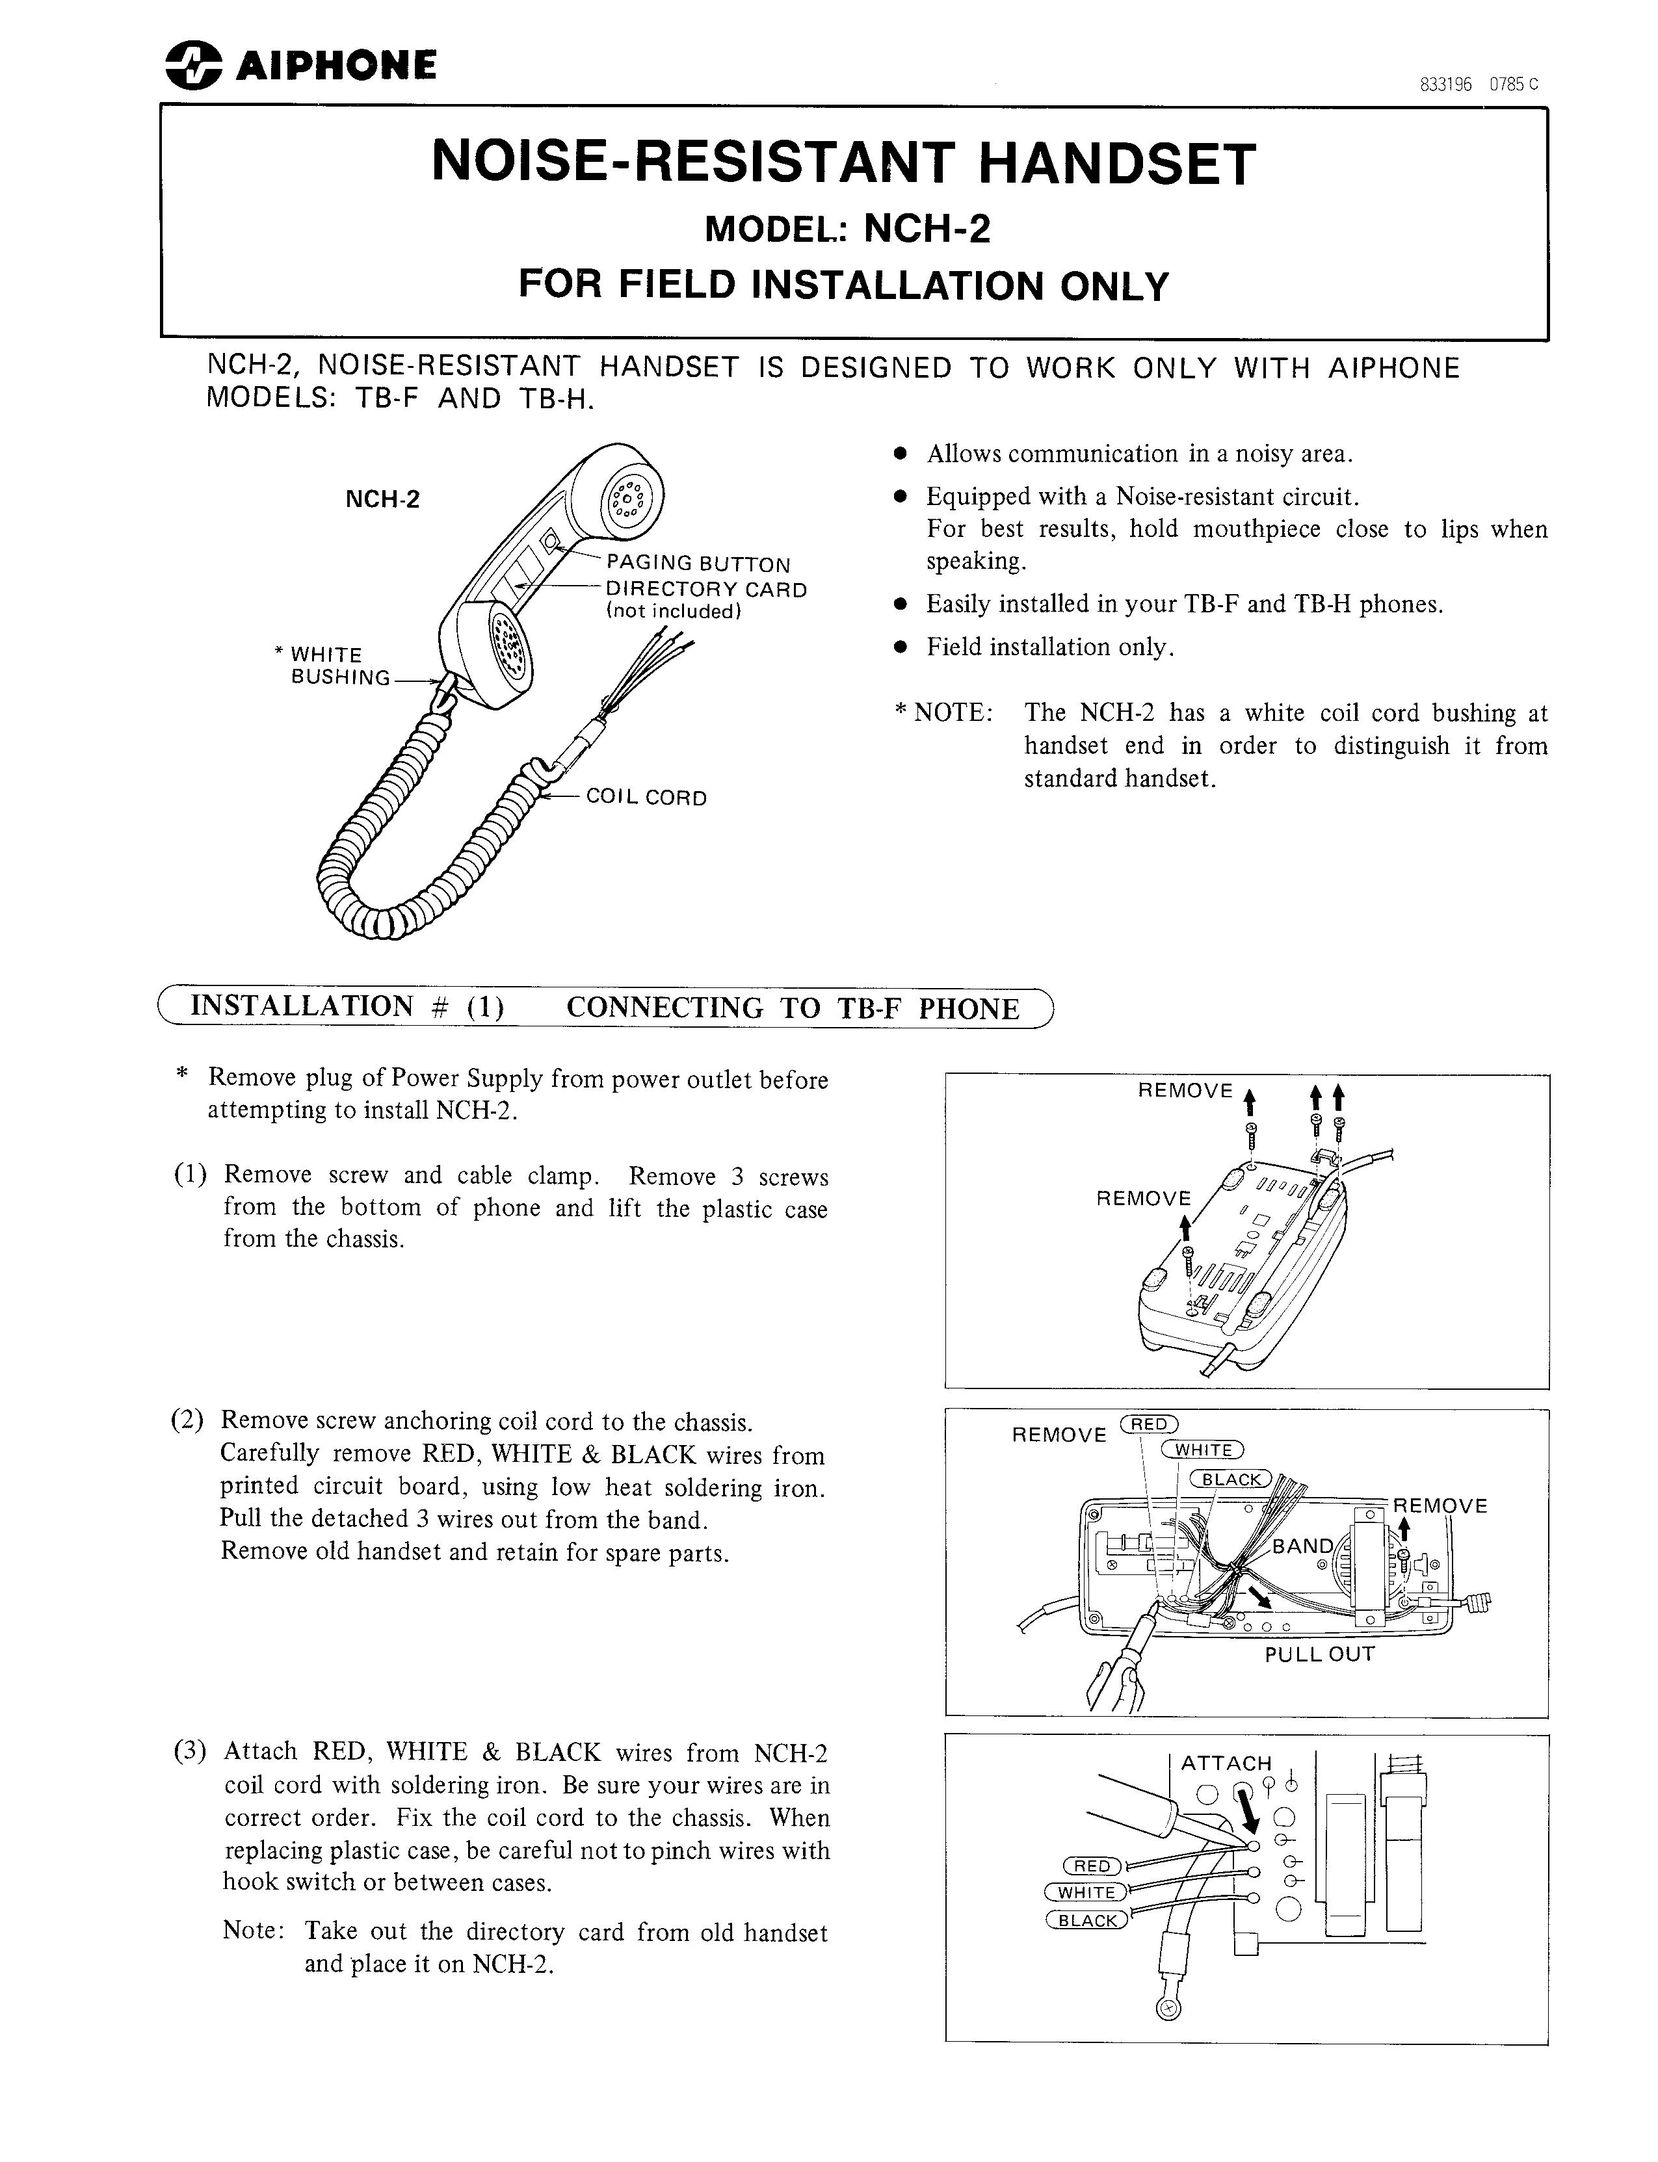 Aiphone nch-2 Wireless Office Headset User Manual